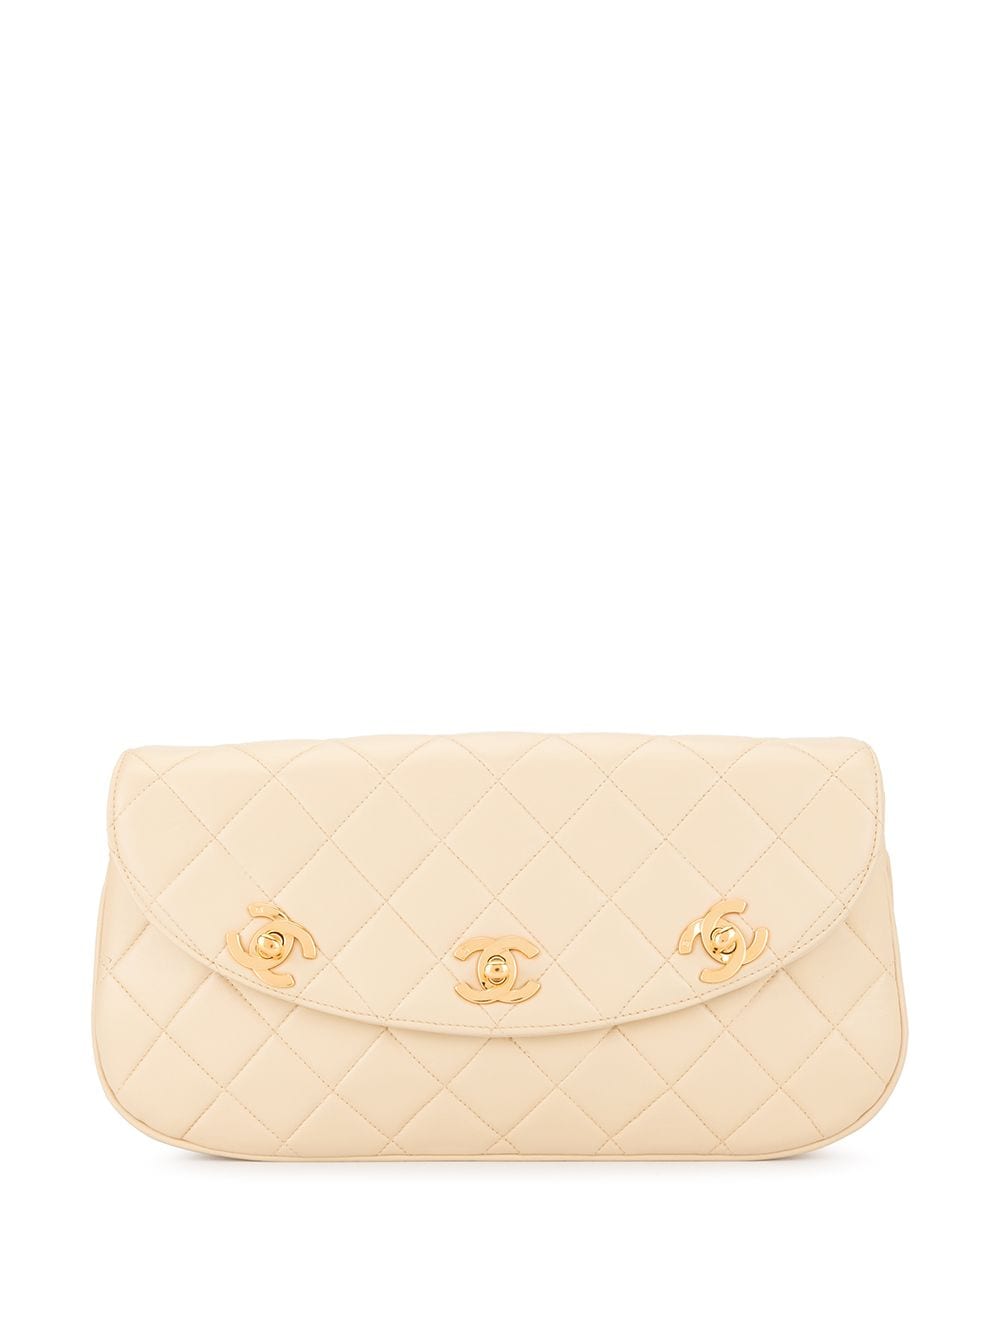 CHANEL Pre-Owned 1991-1994 CC quilted clutch bag - Neutrals